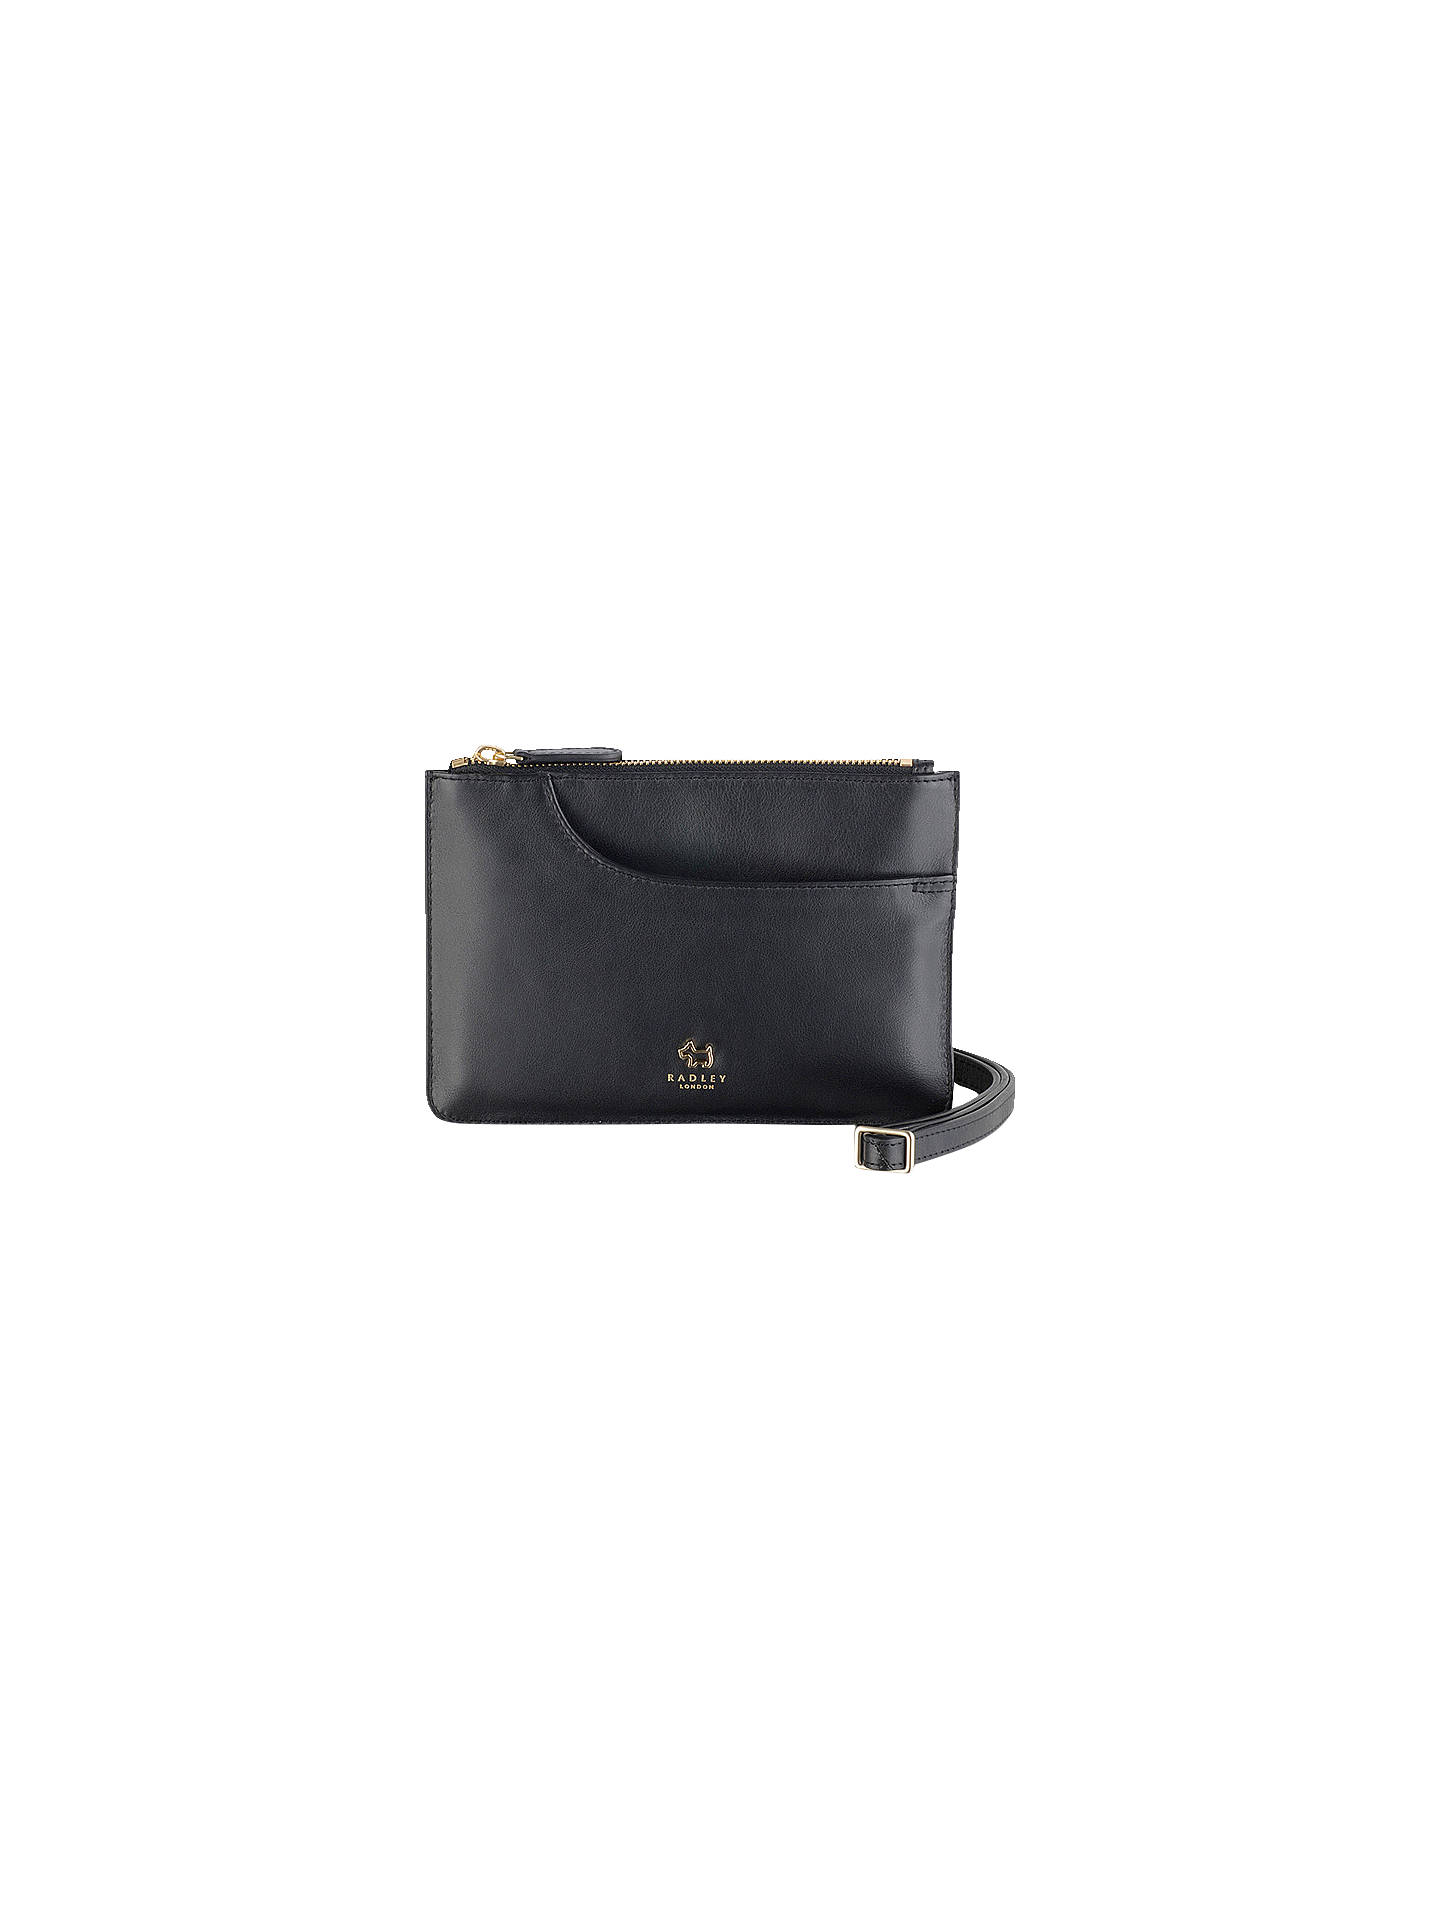 Radley Pockets Leather Small Cross Body Bag at John Lewis & Partners